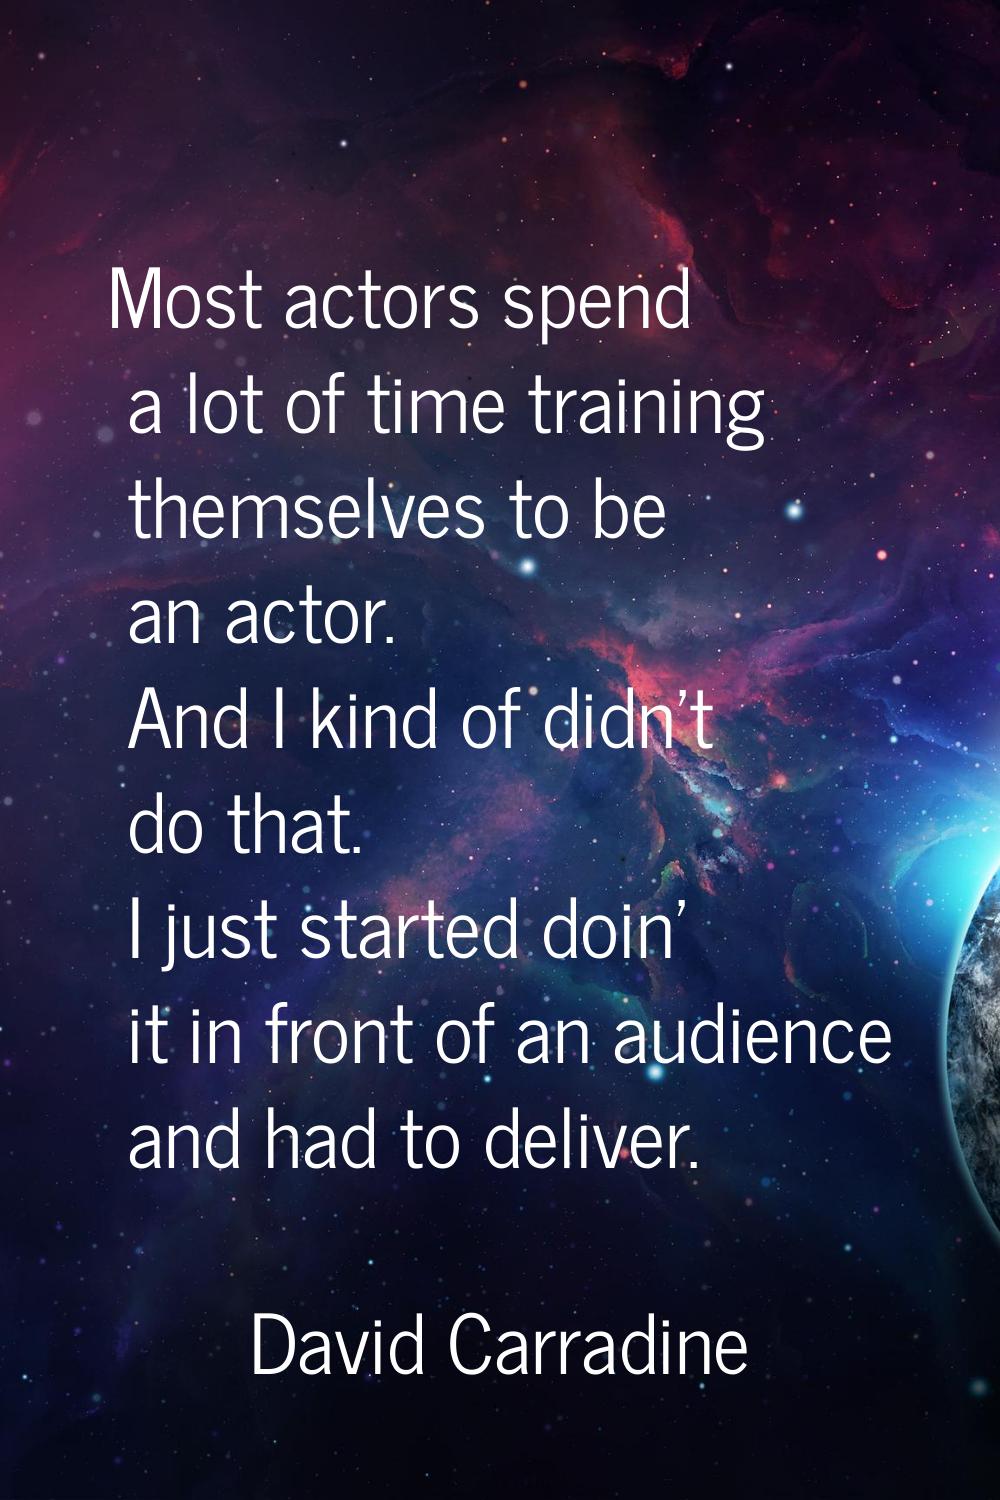 Most actors spend a lot of time training themselves to be an actor. And I kind of didn't do that. I